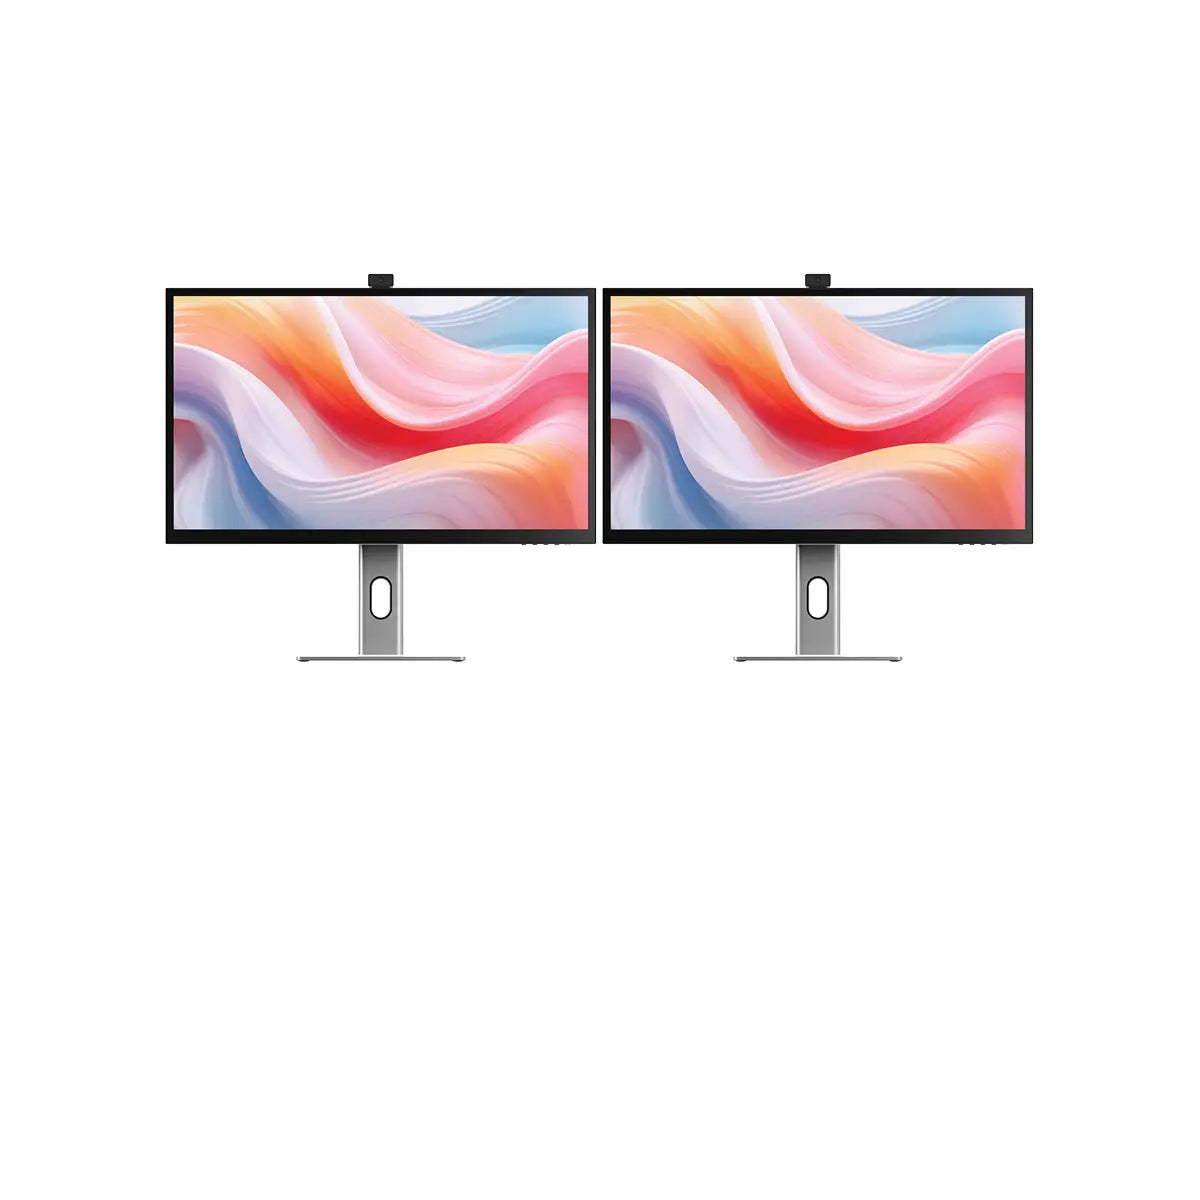 clarity-pro-27-uhd-4k-monitor-with-65w-pd-and-webcam-pack-of-21